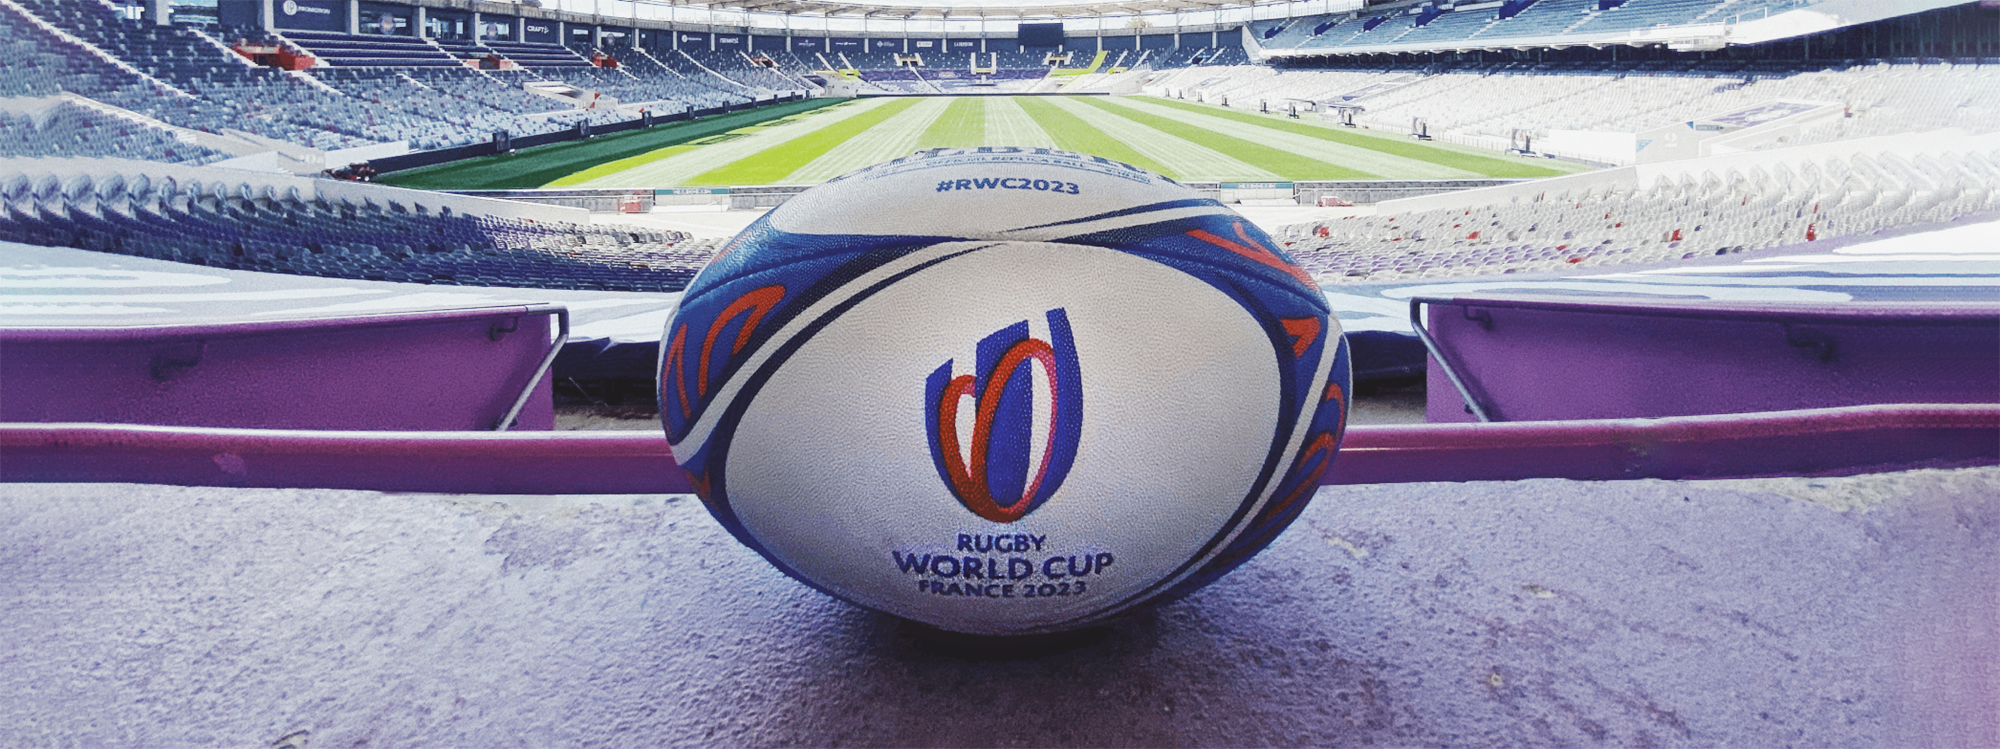 kicking off time for the rugby world cup